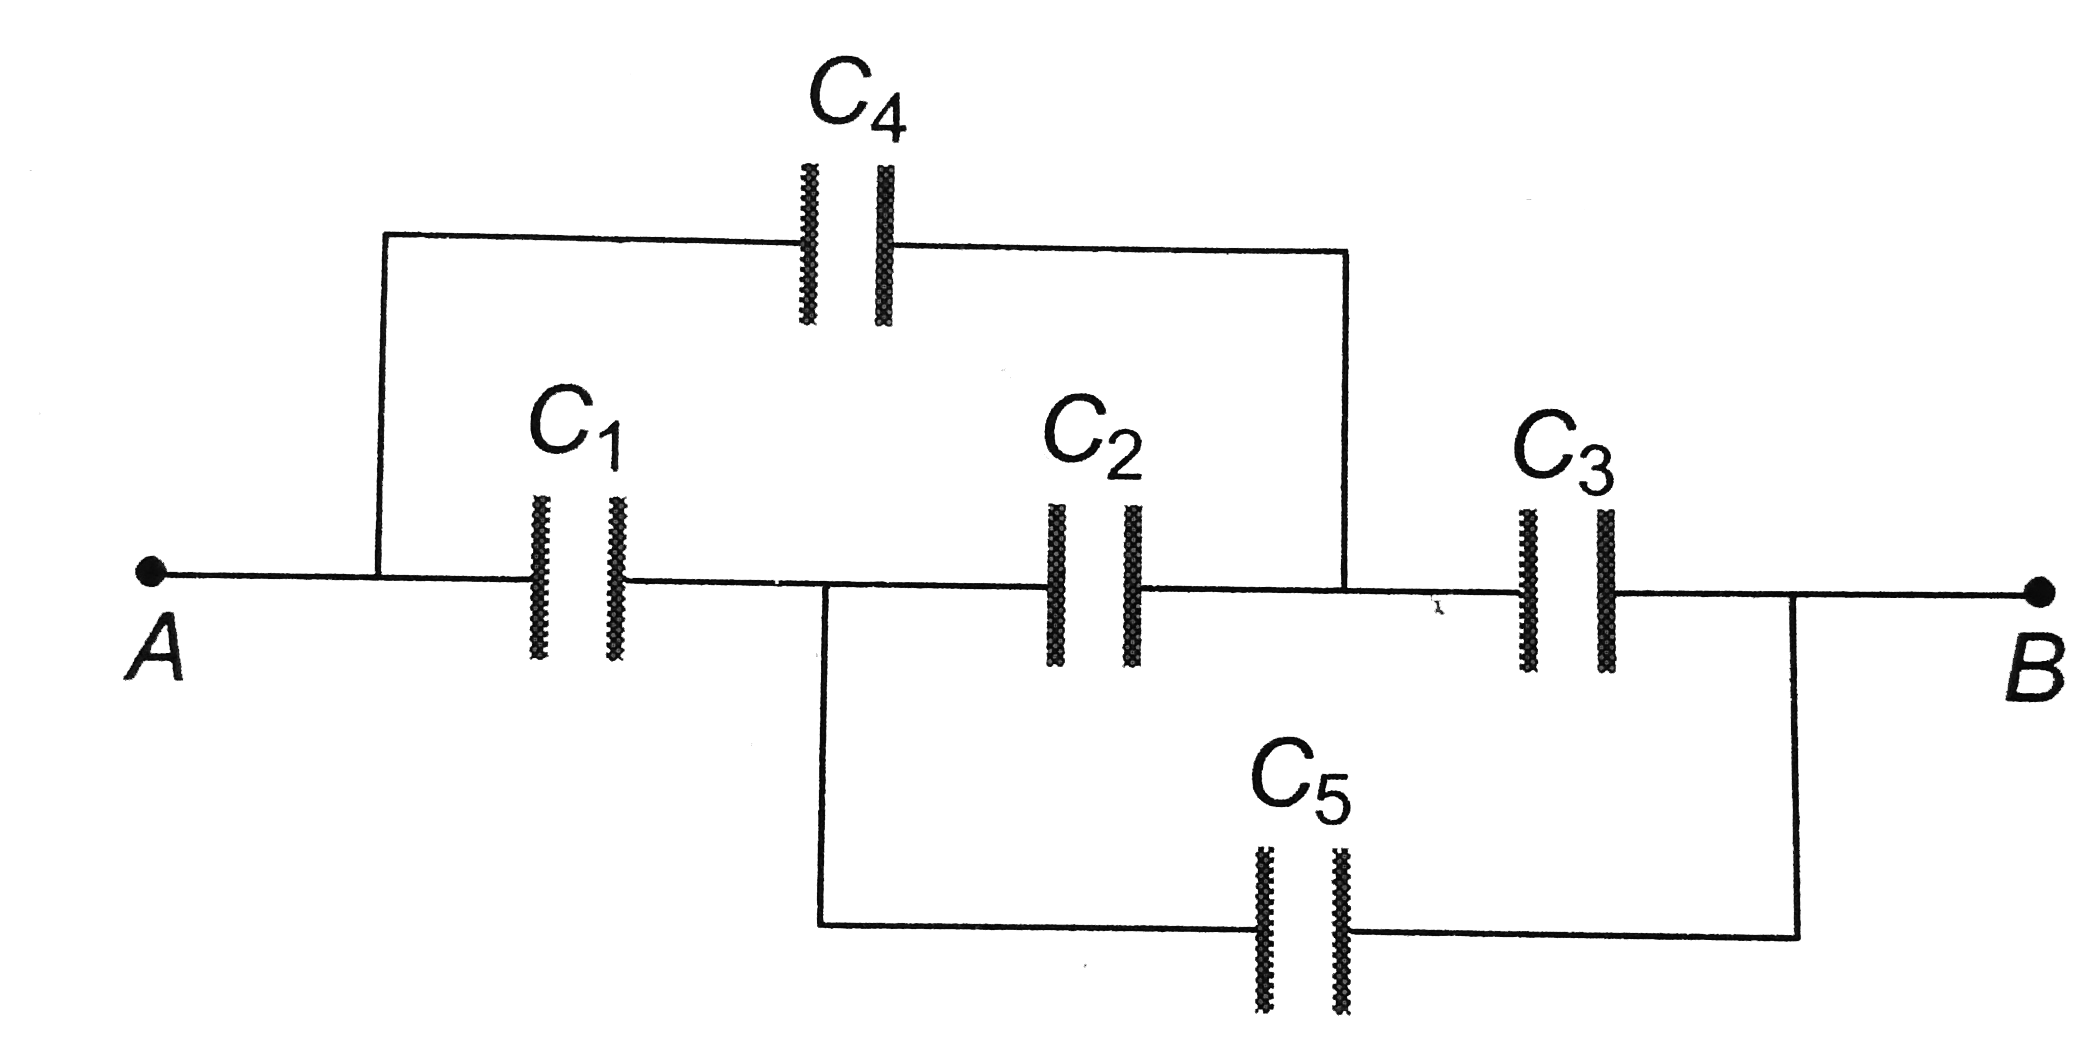 In the given figure the capacitors C(1), C(3), C(4),C(5) have a capaciance 4 muF each if the capaitor C(2) has a capacitance 10 muF, then effective capacitance between A and B will be